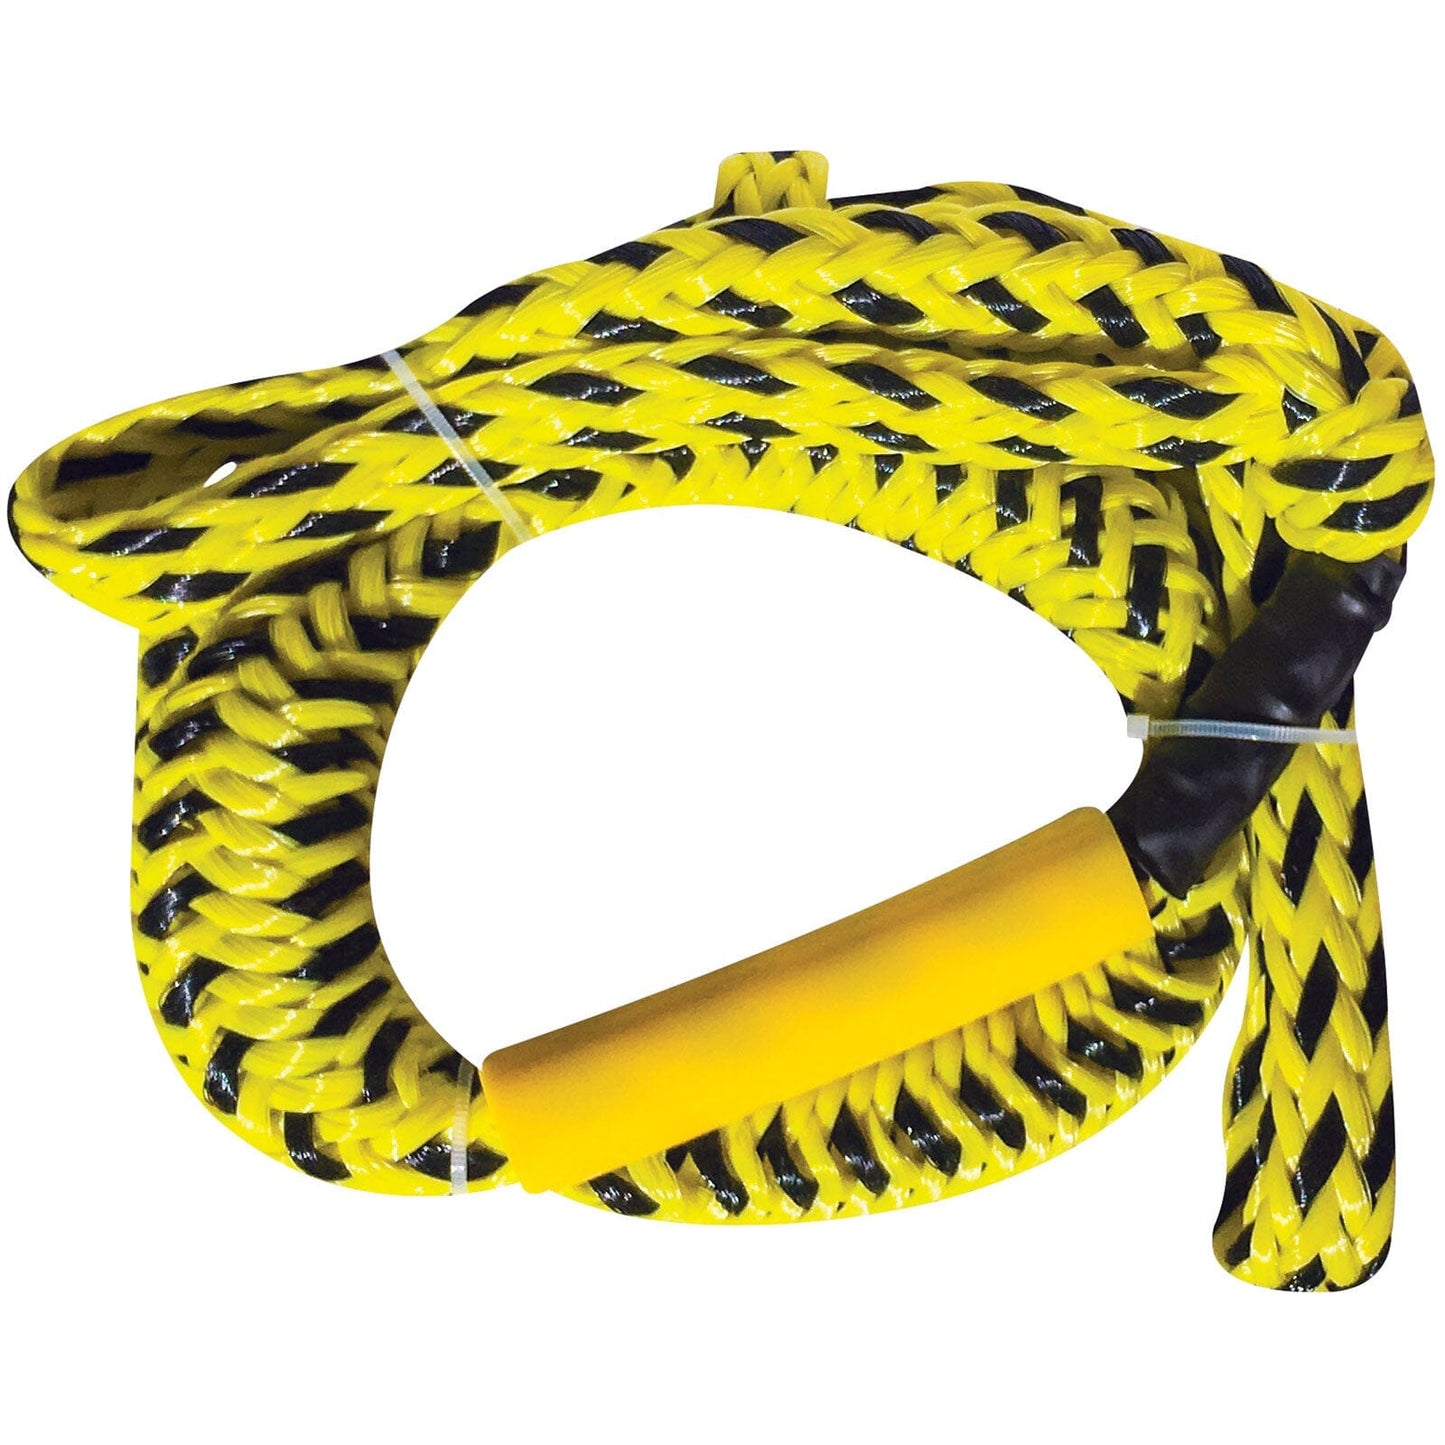 4K Bungee Tow Rope Extension